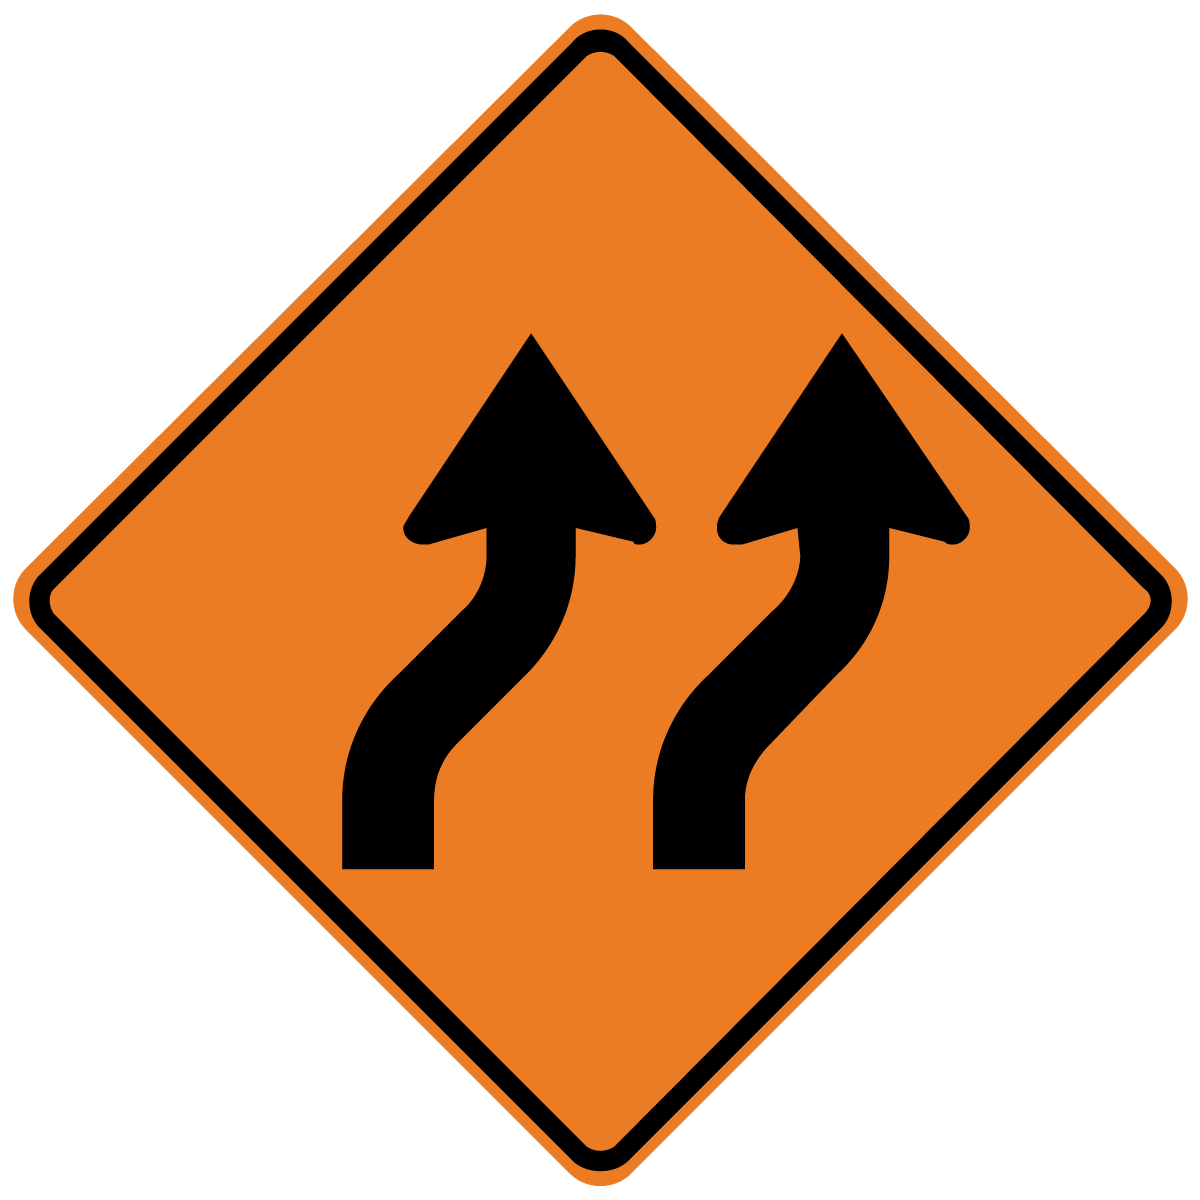 W1-4b Reverse Curve (2 lanes) (Left or Right)